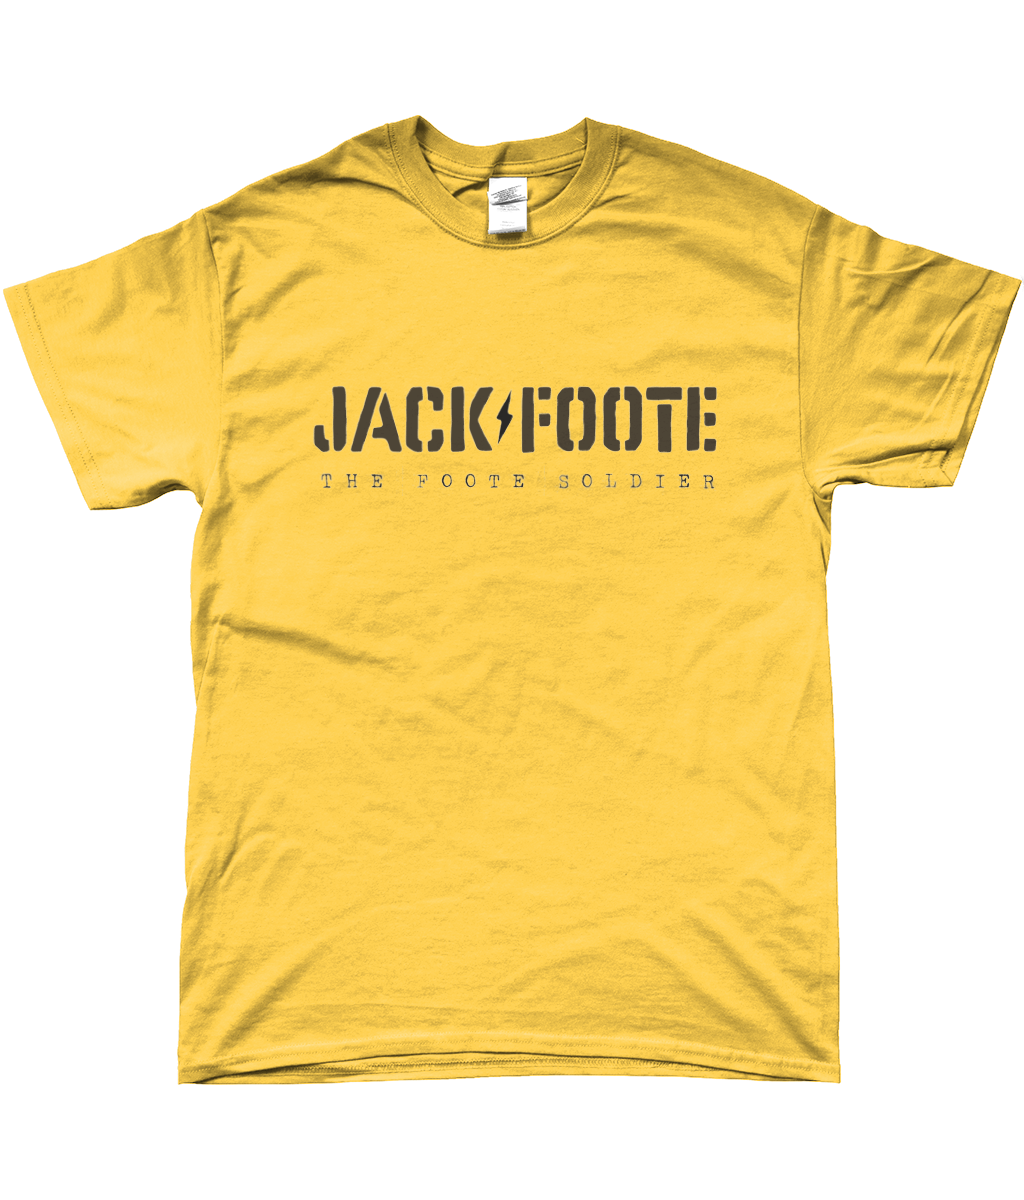 Jack Foote T-Shirt (White&Yellow)